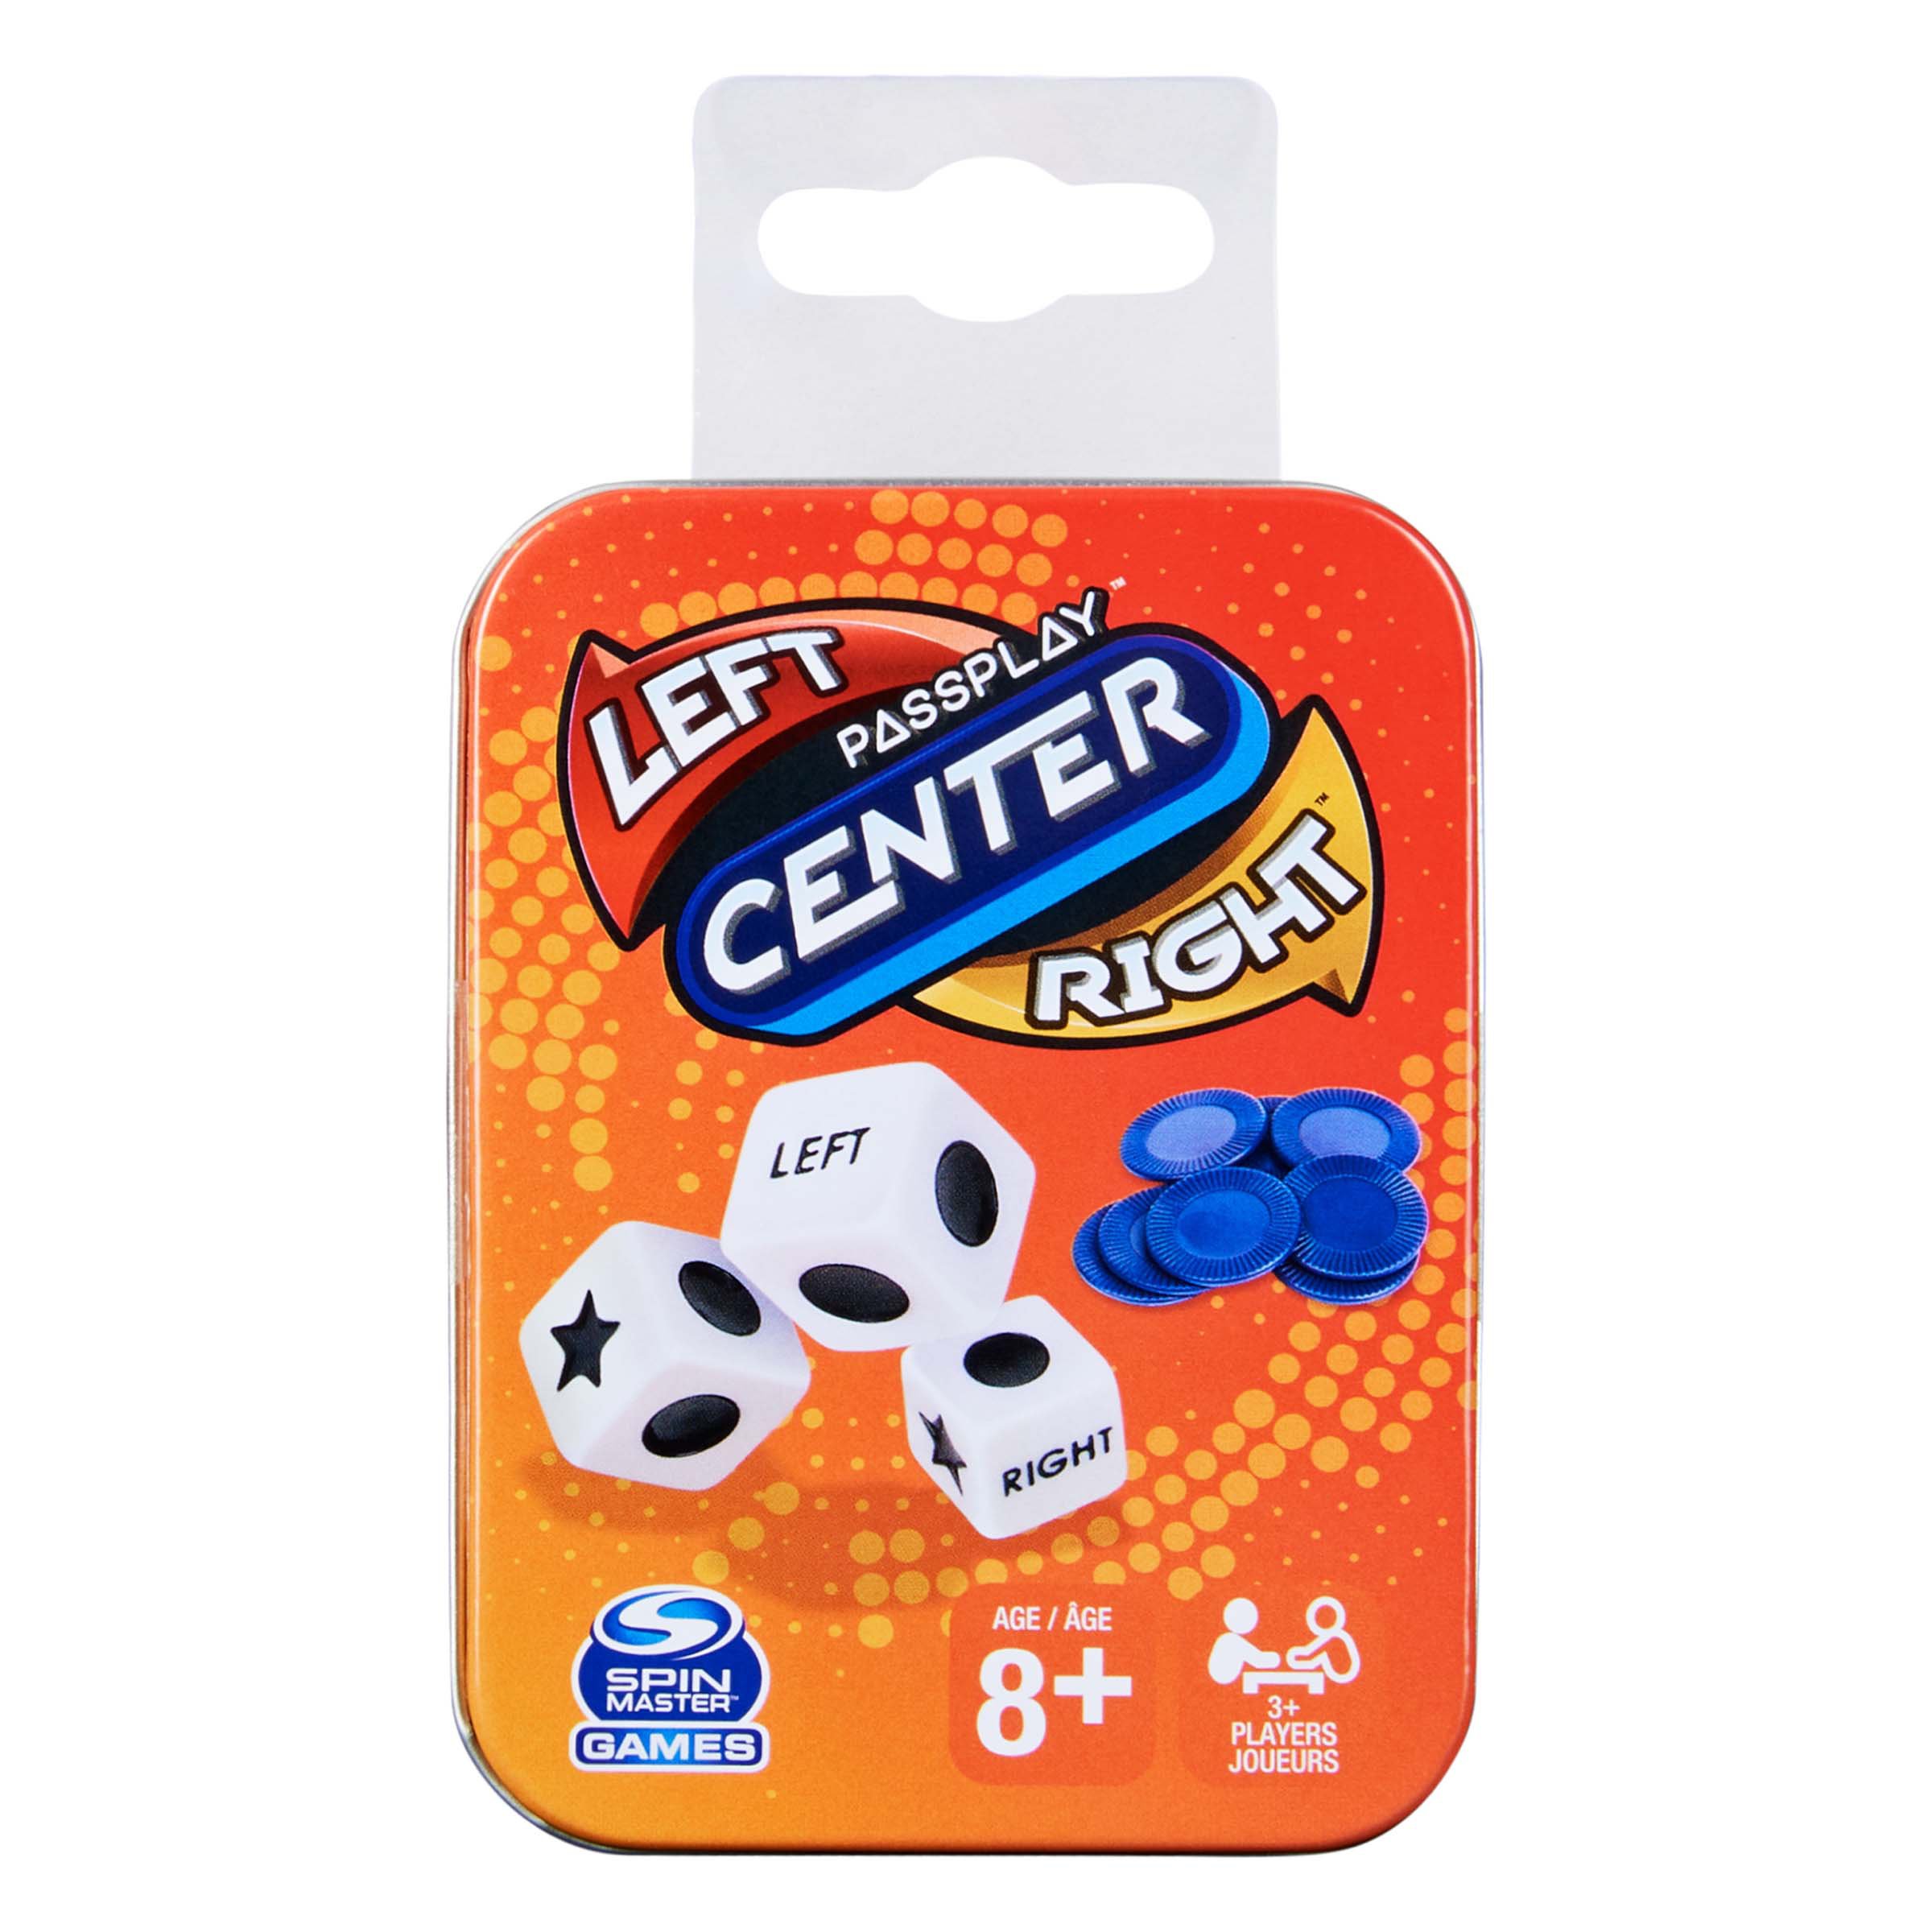 The Game of Left Center Right Dice Game